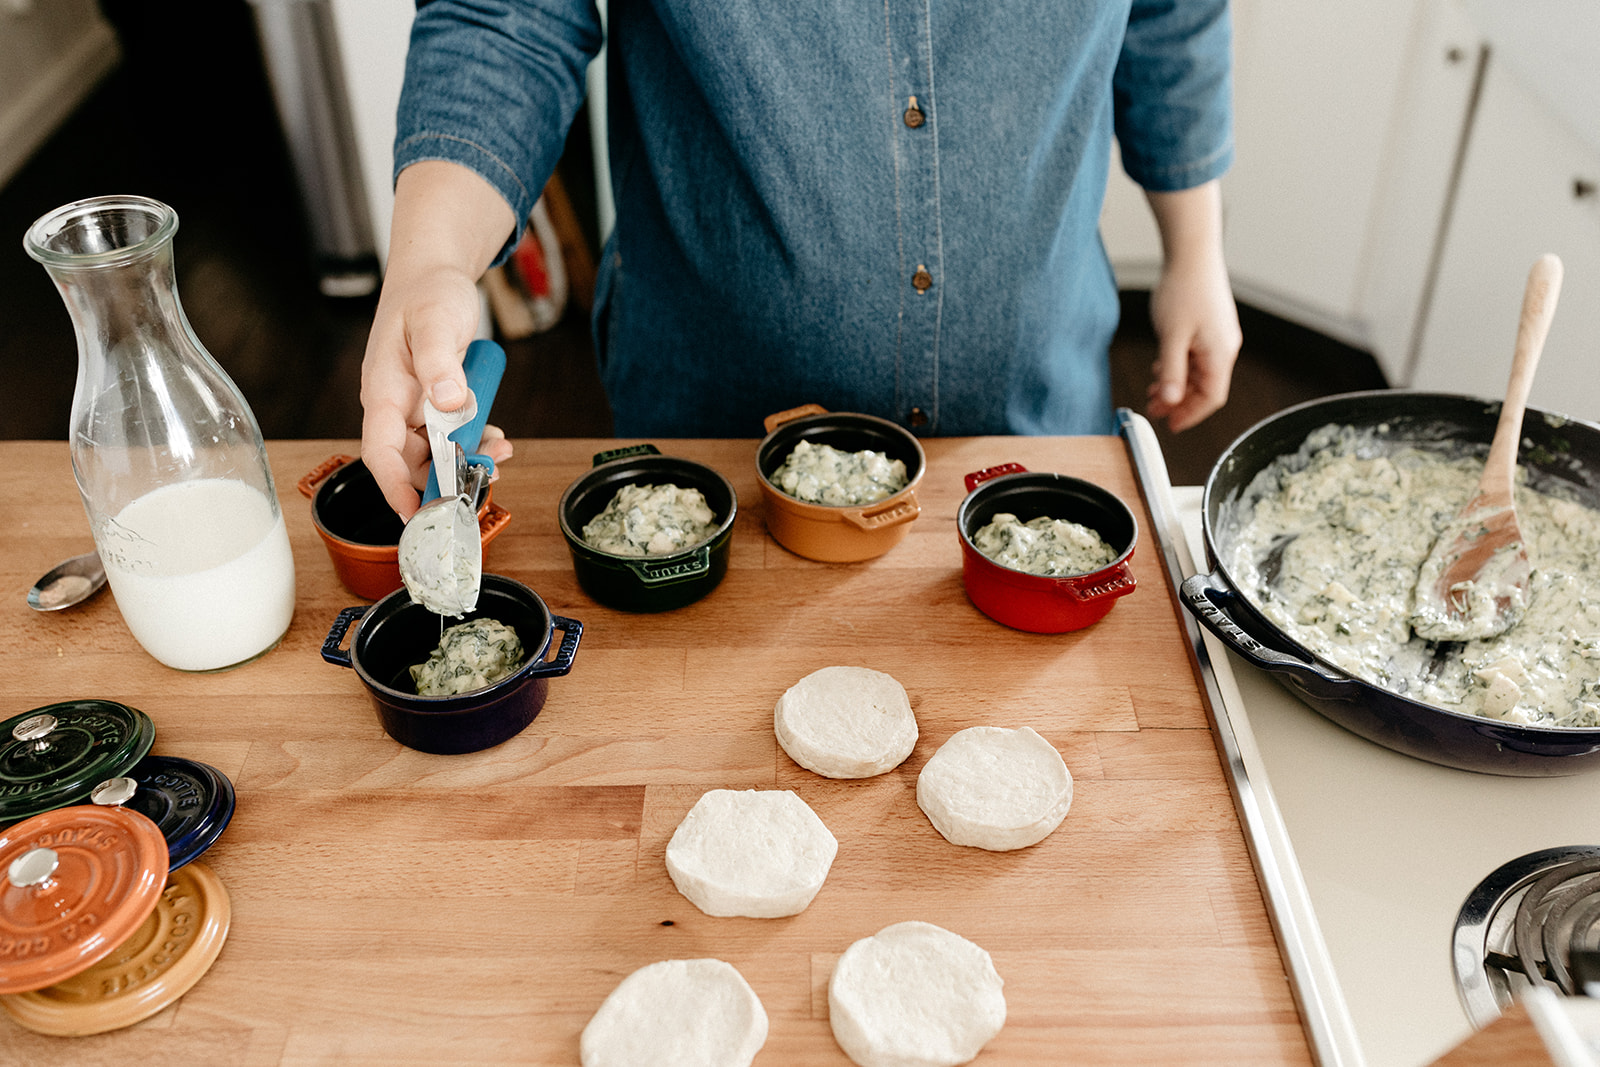 1-31-19-molly-yeh-spinach-and-artichoke-chicken-biscuits-8.jpg